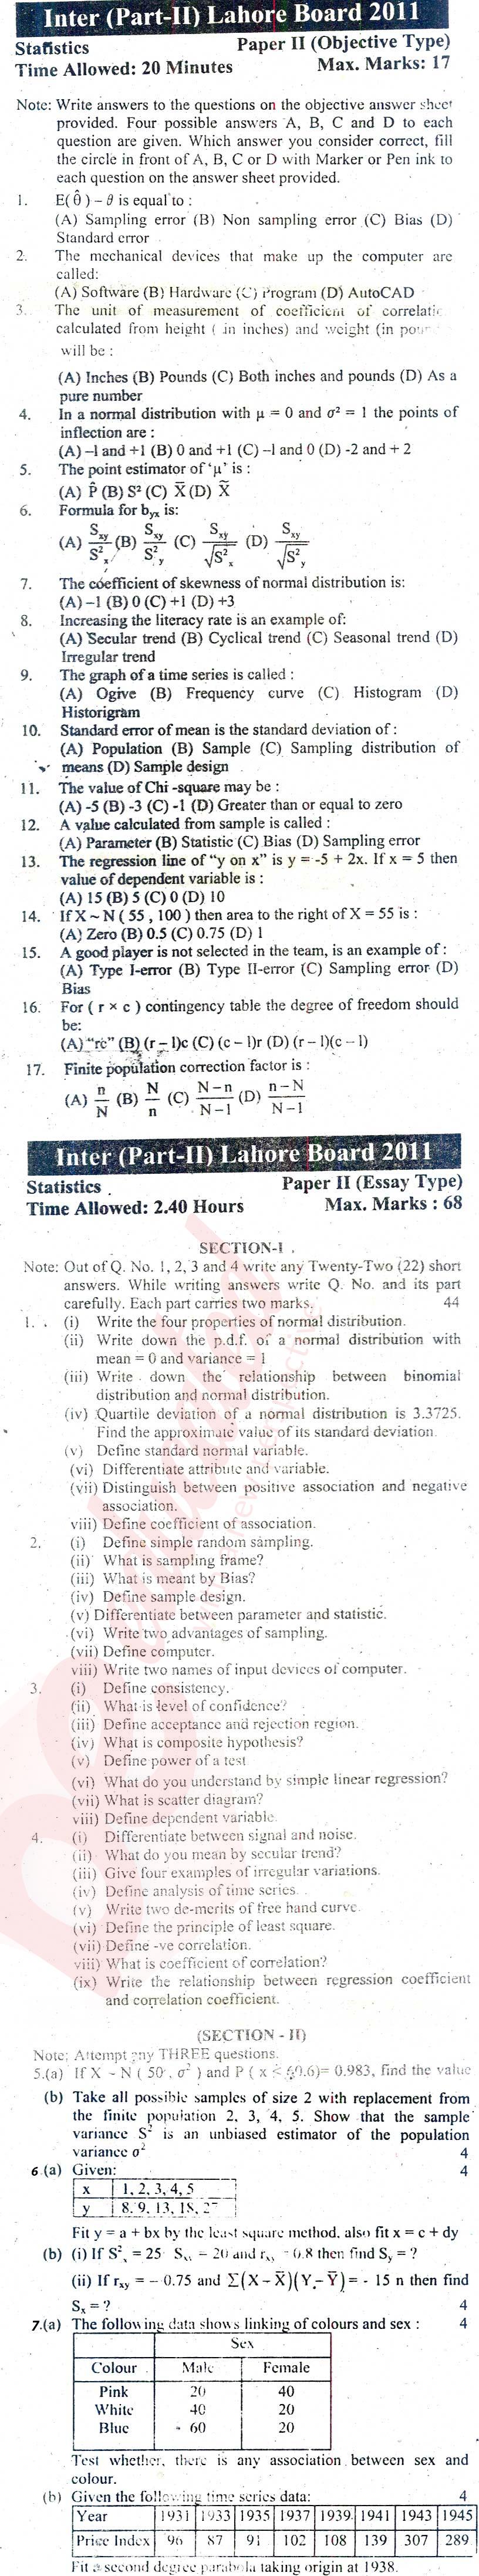 Statistics 12th class Past Paper Group 1 BISE Lahore 2011